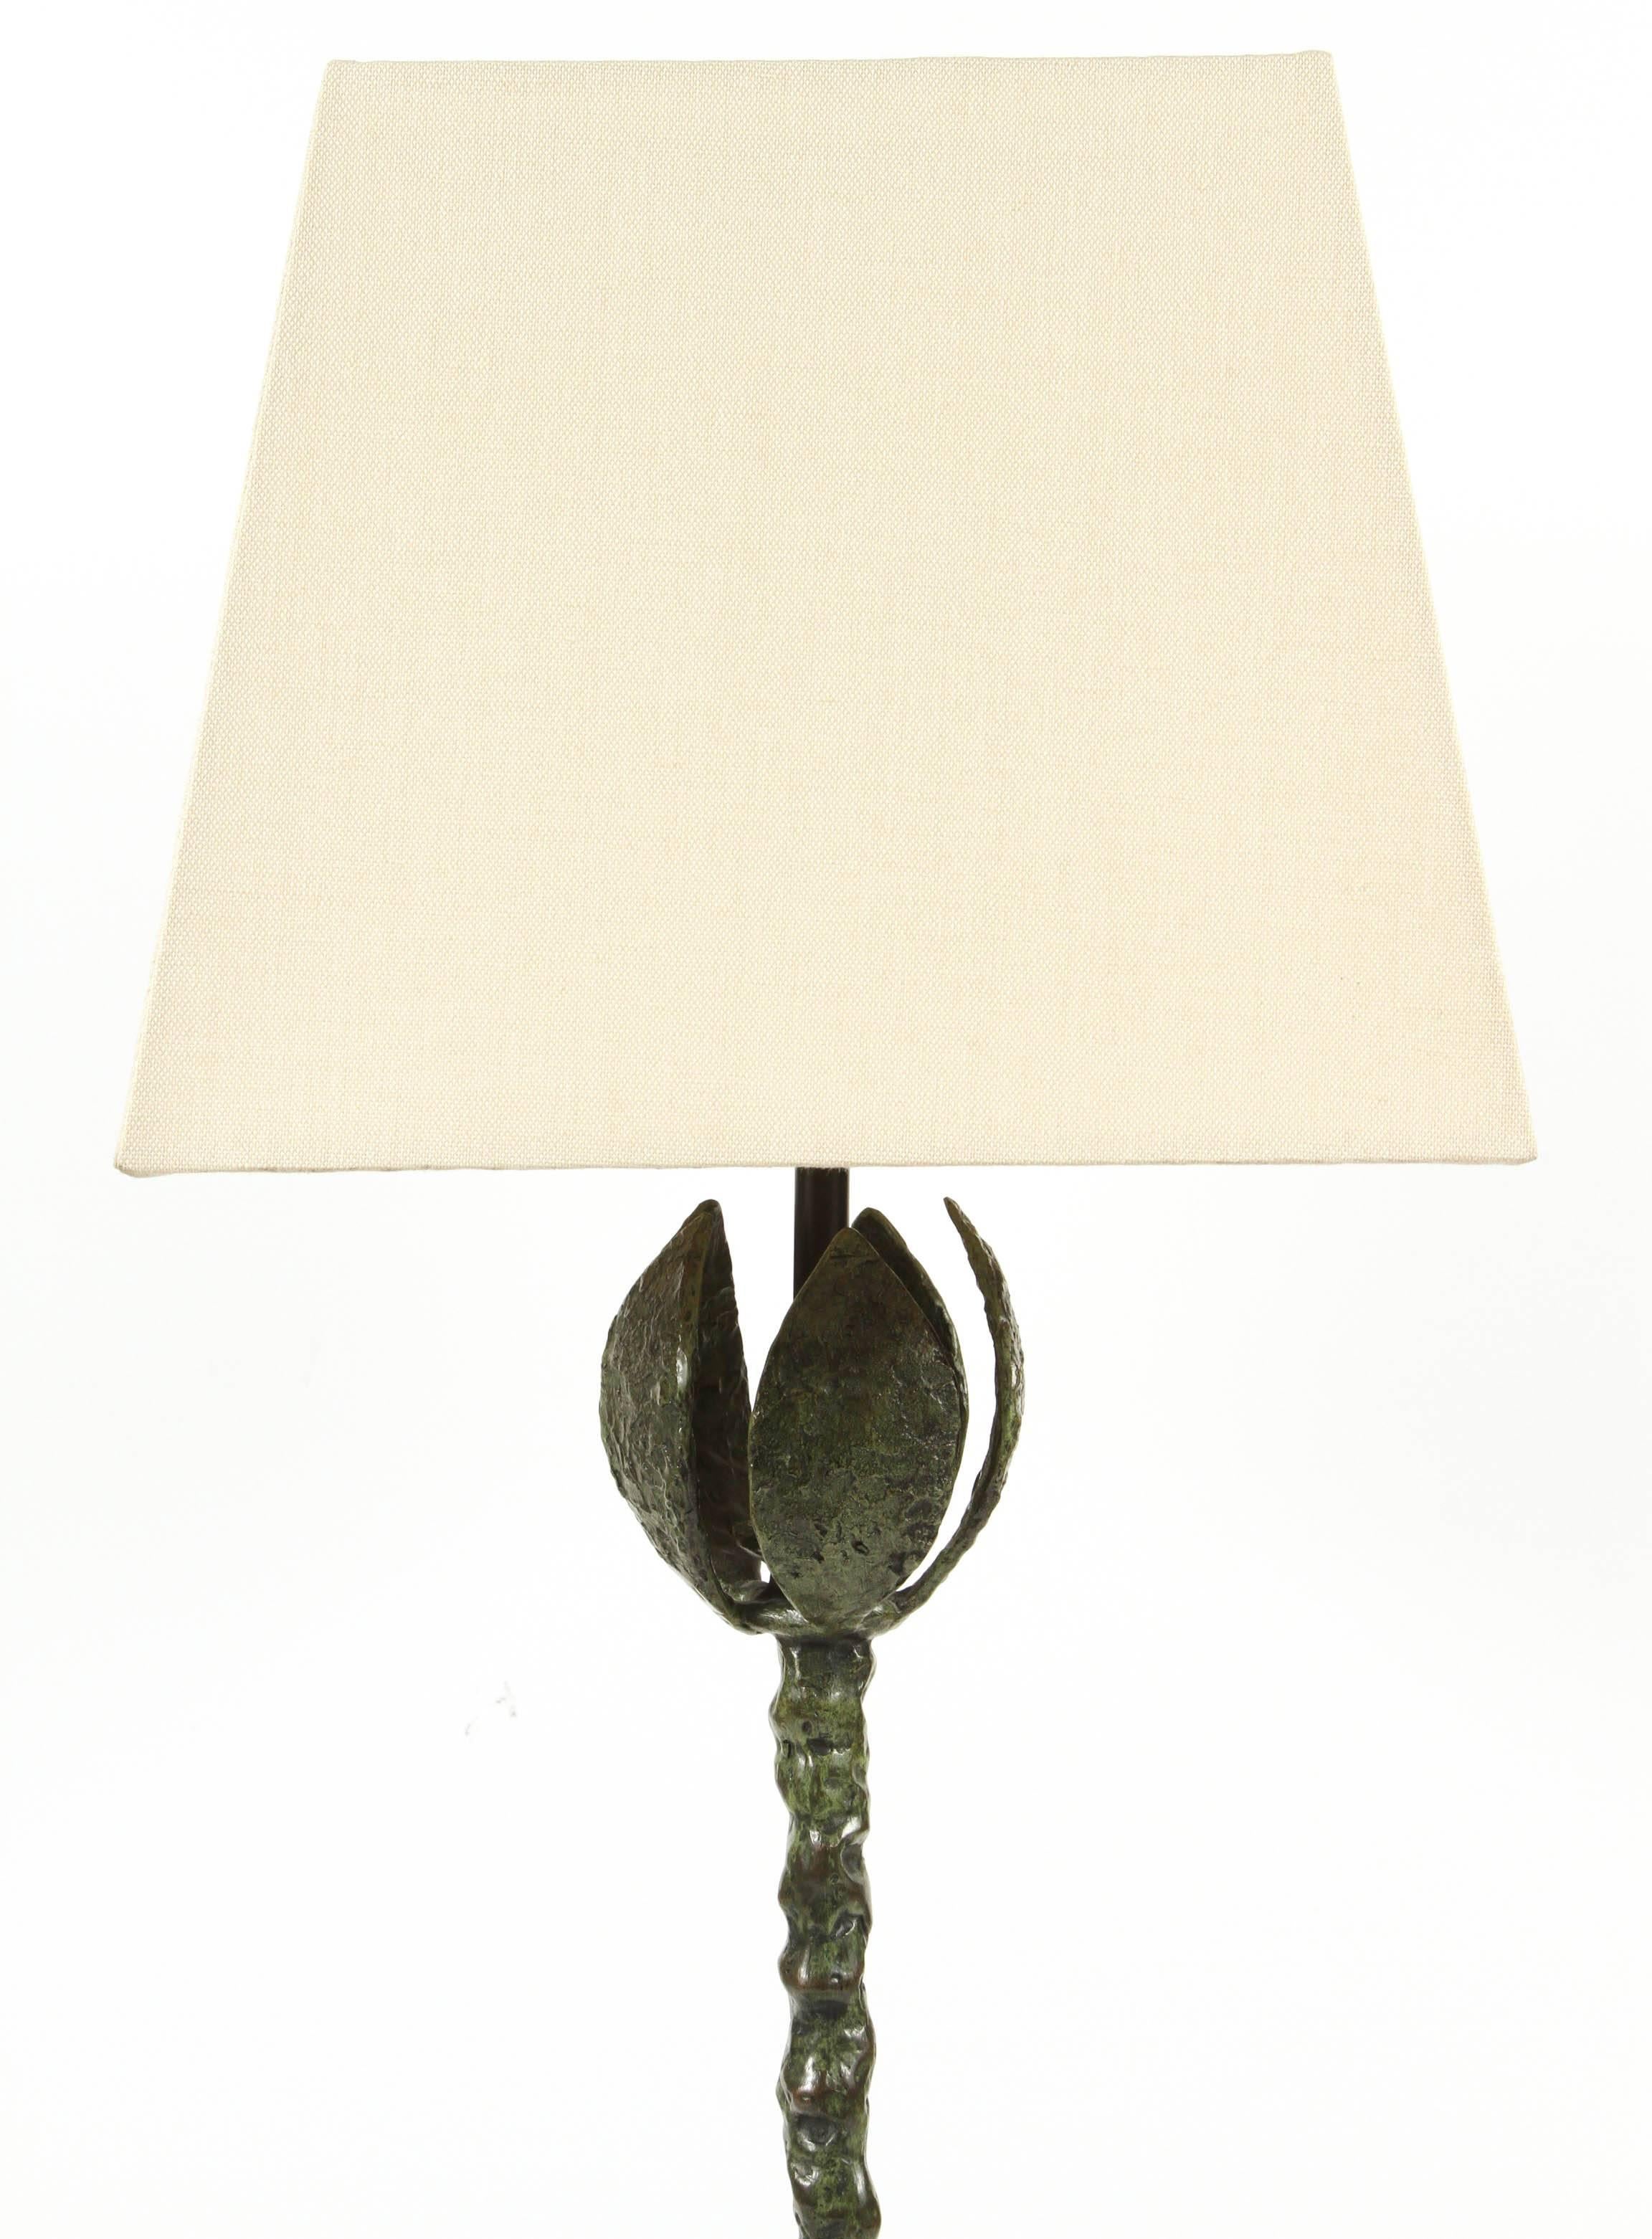 Gorgeous bronze table lamp from an authorized reproduction line of Diego Giacometti's original creations by the Nelson Rockefeller Collection, Inc. This particular design is similar to the lamp documented in the book 